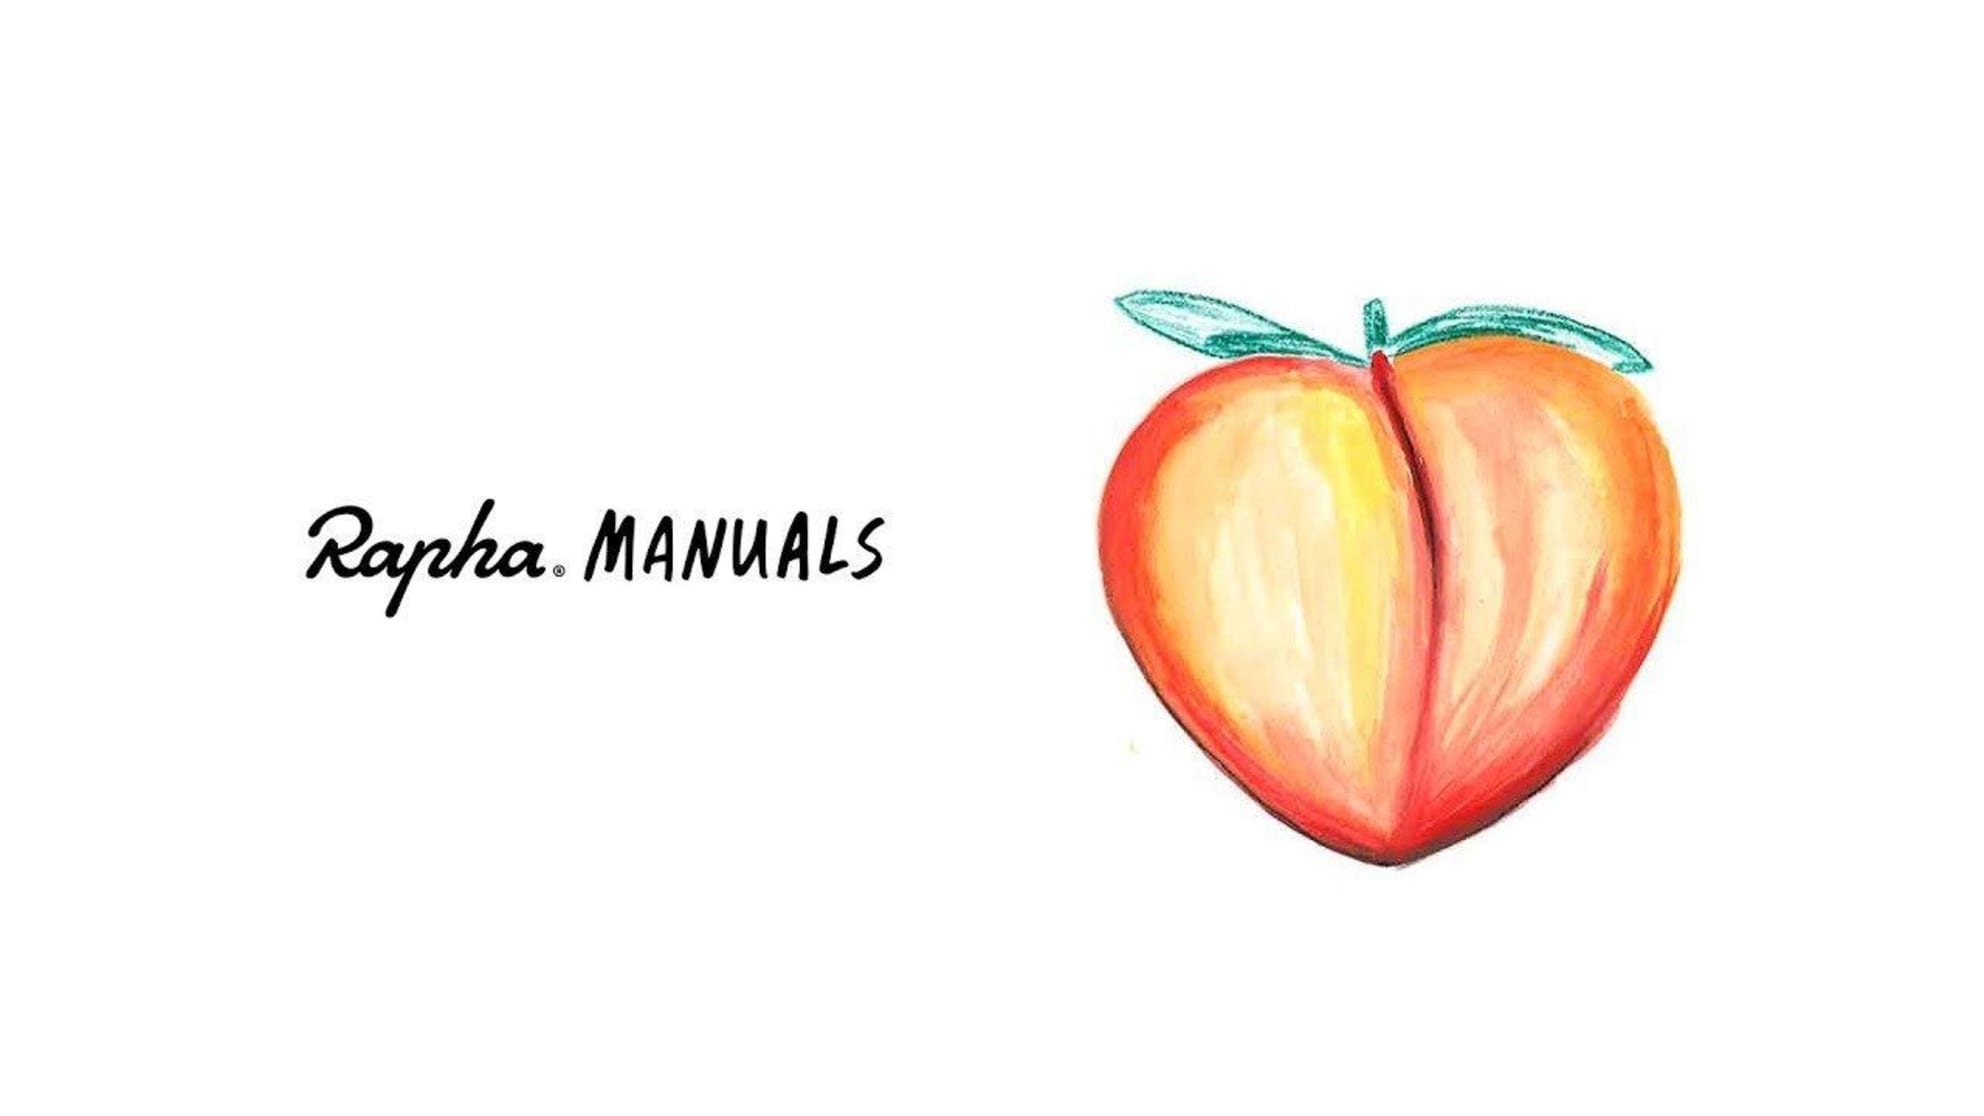 Rapha Manuals: Protect Your Peach